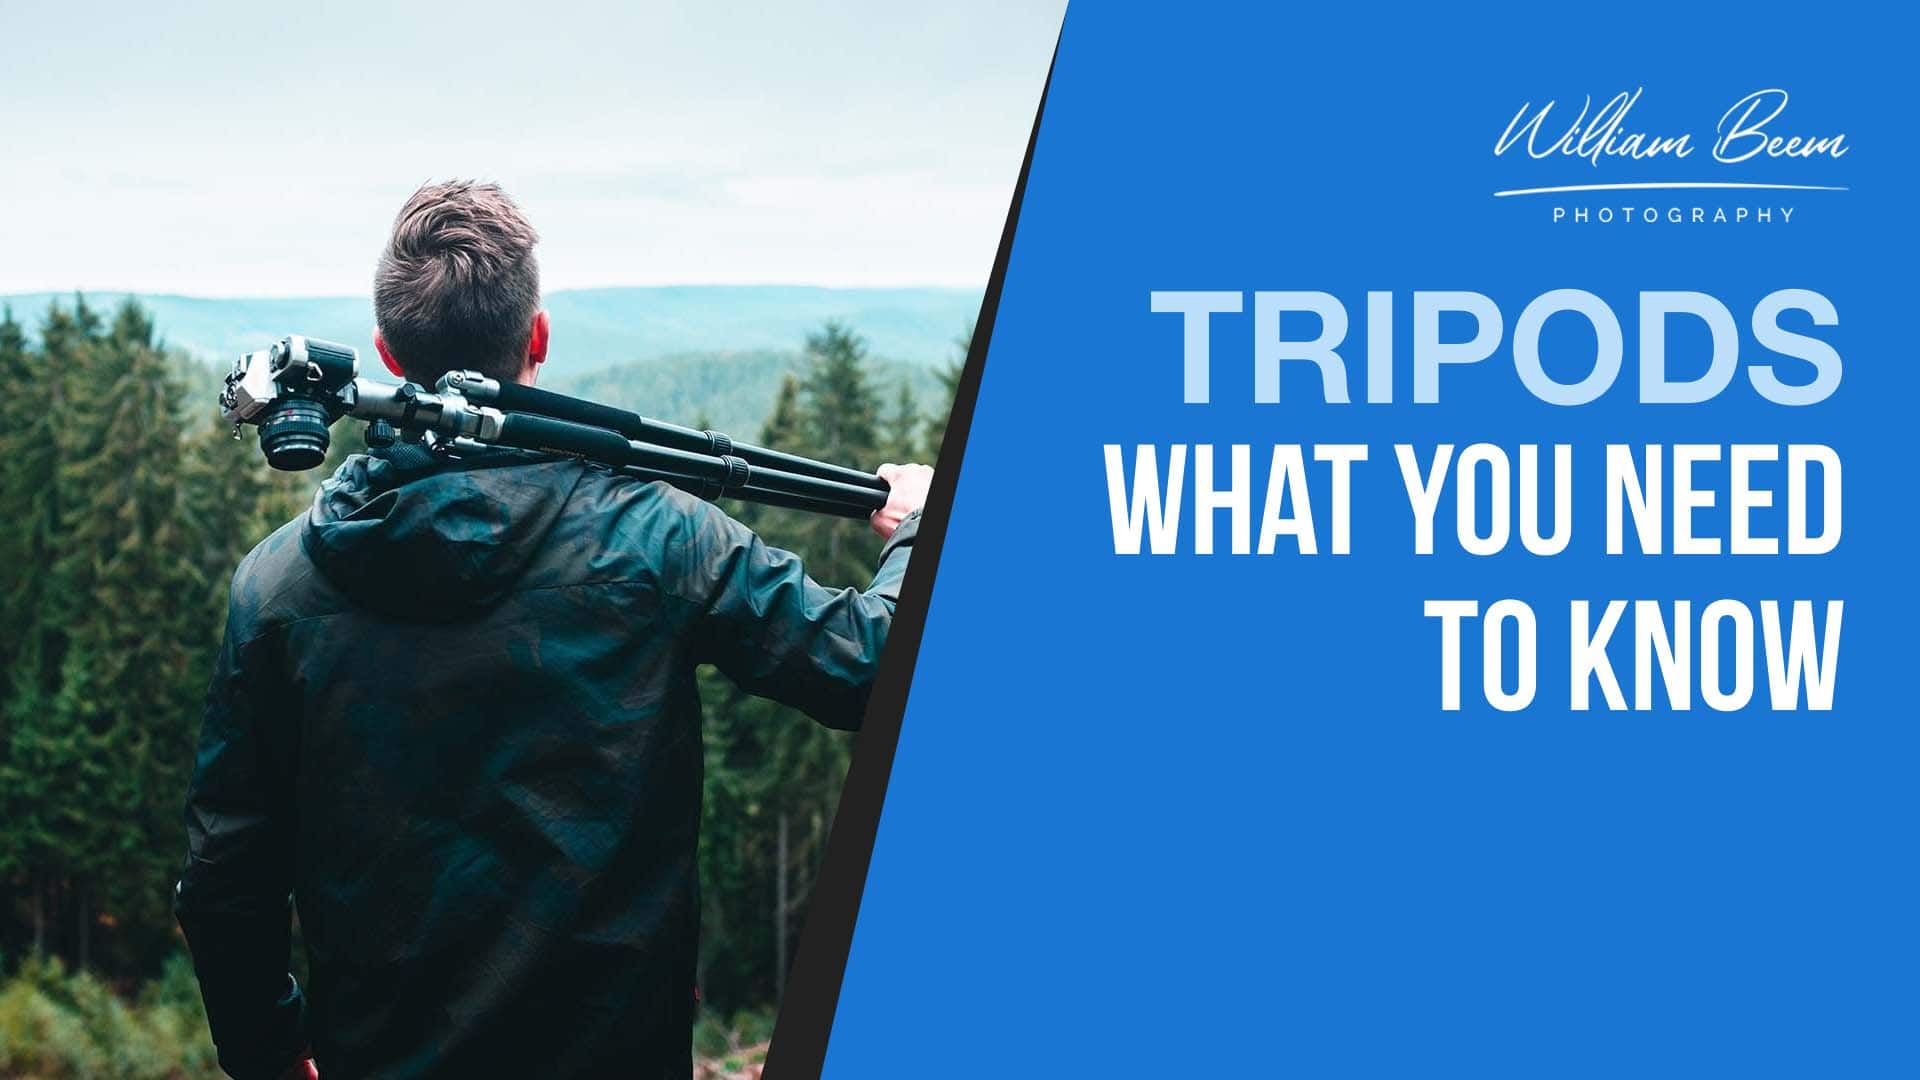 Tripods - What You Need to Know